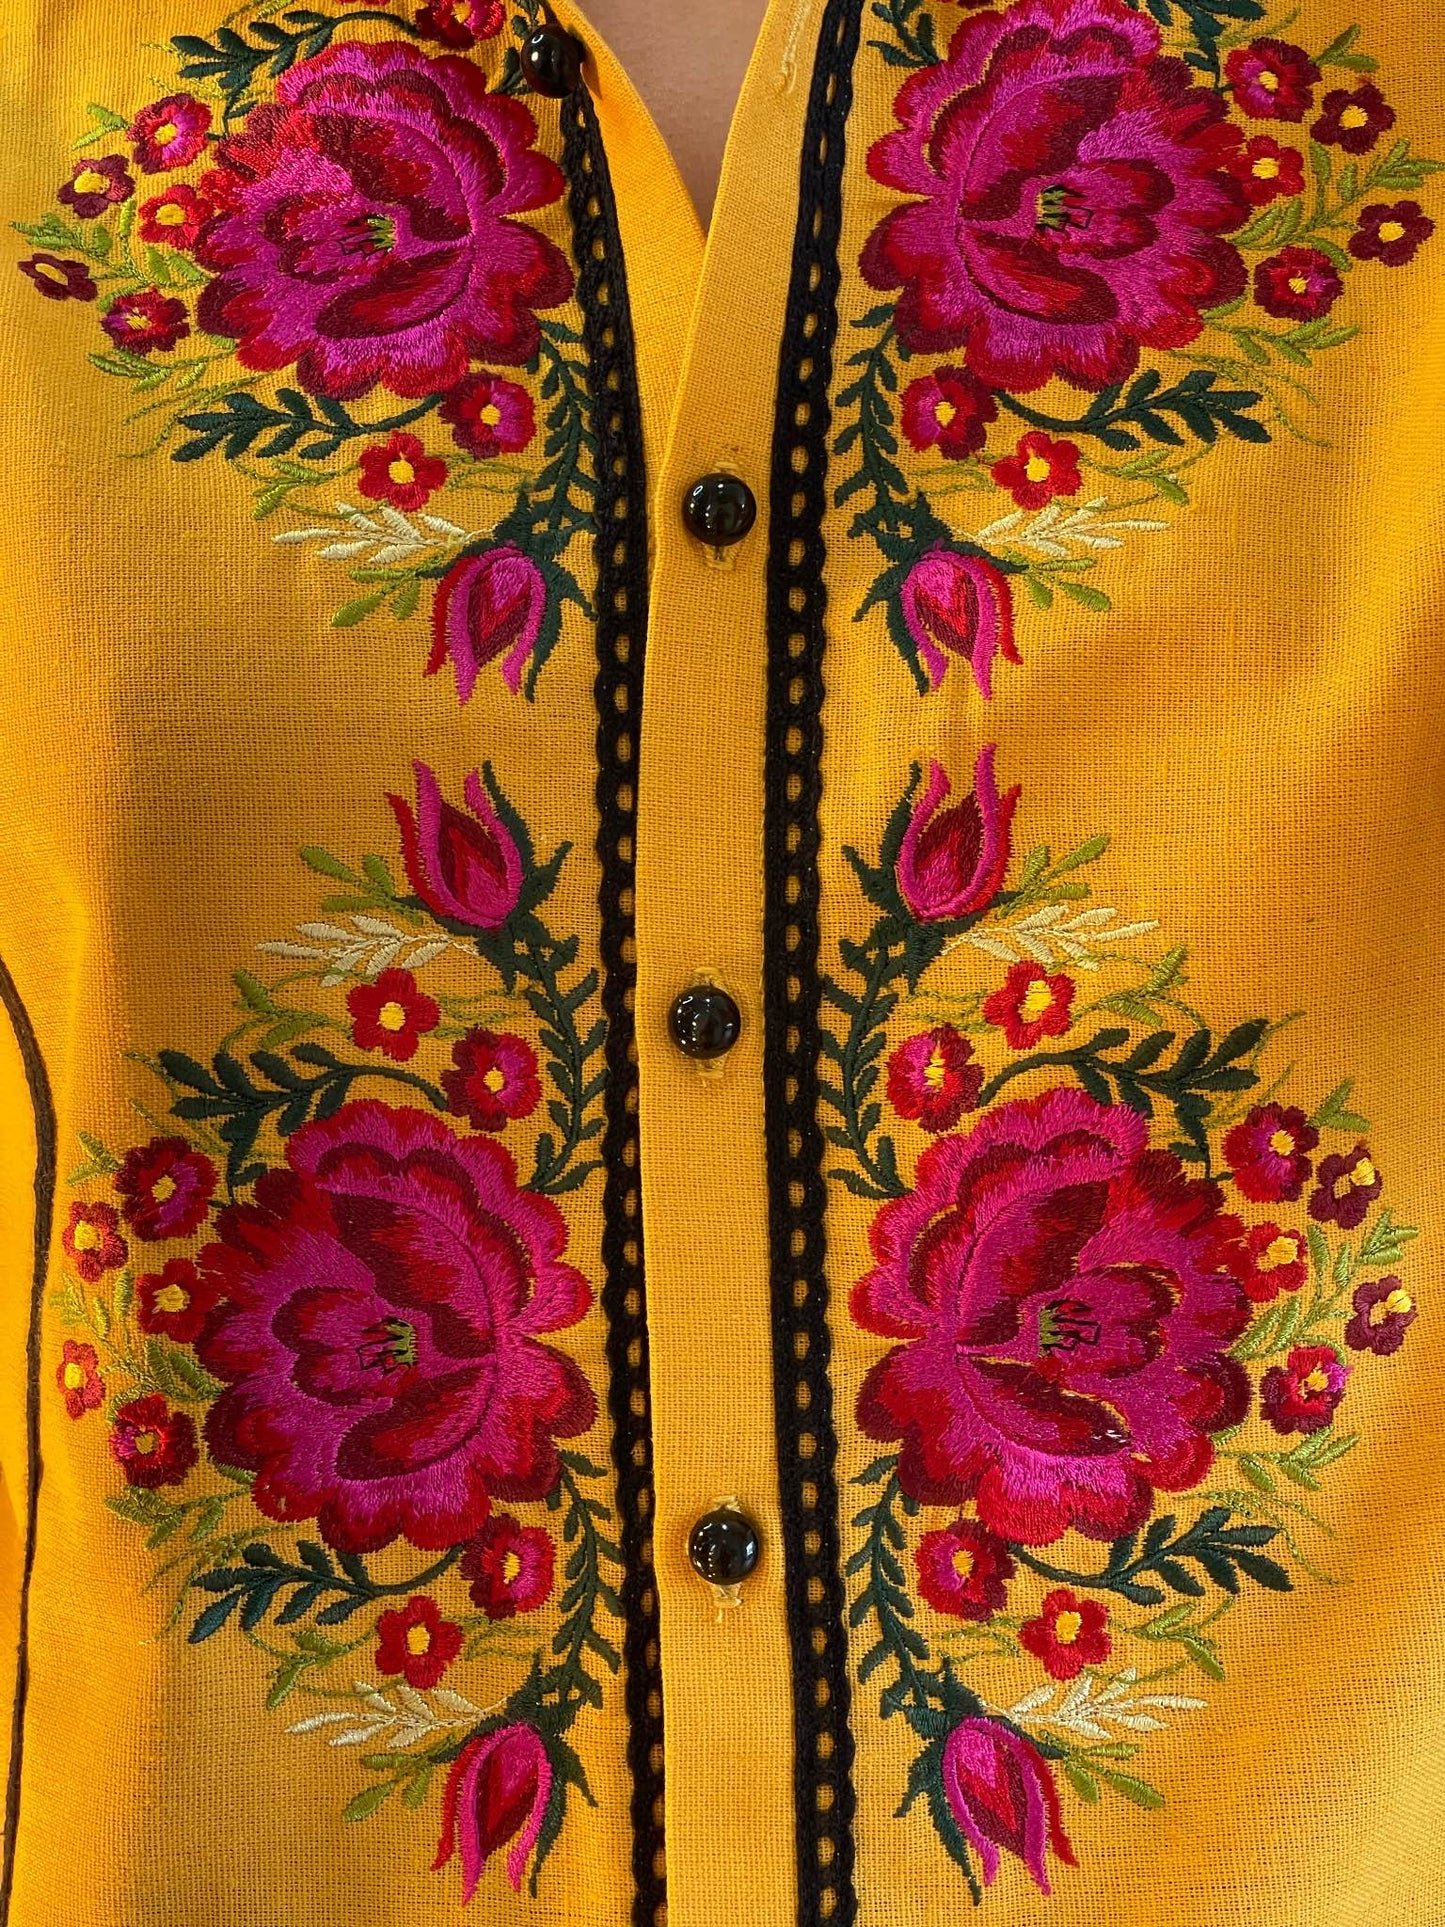 The Ochre Women's Shirt with Flowery Embroidery